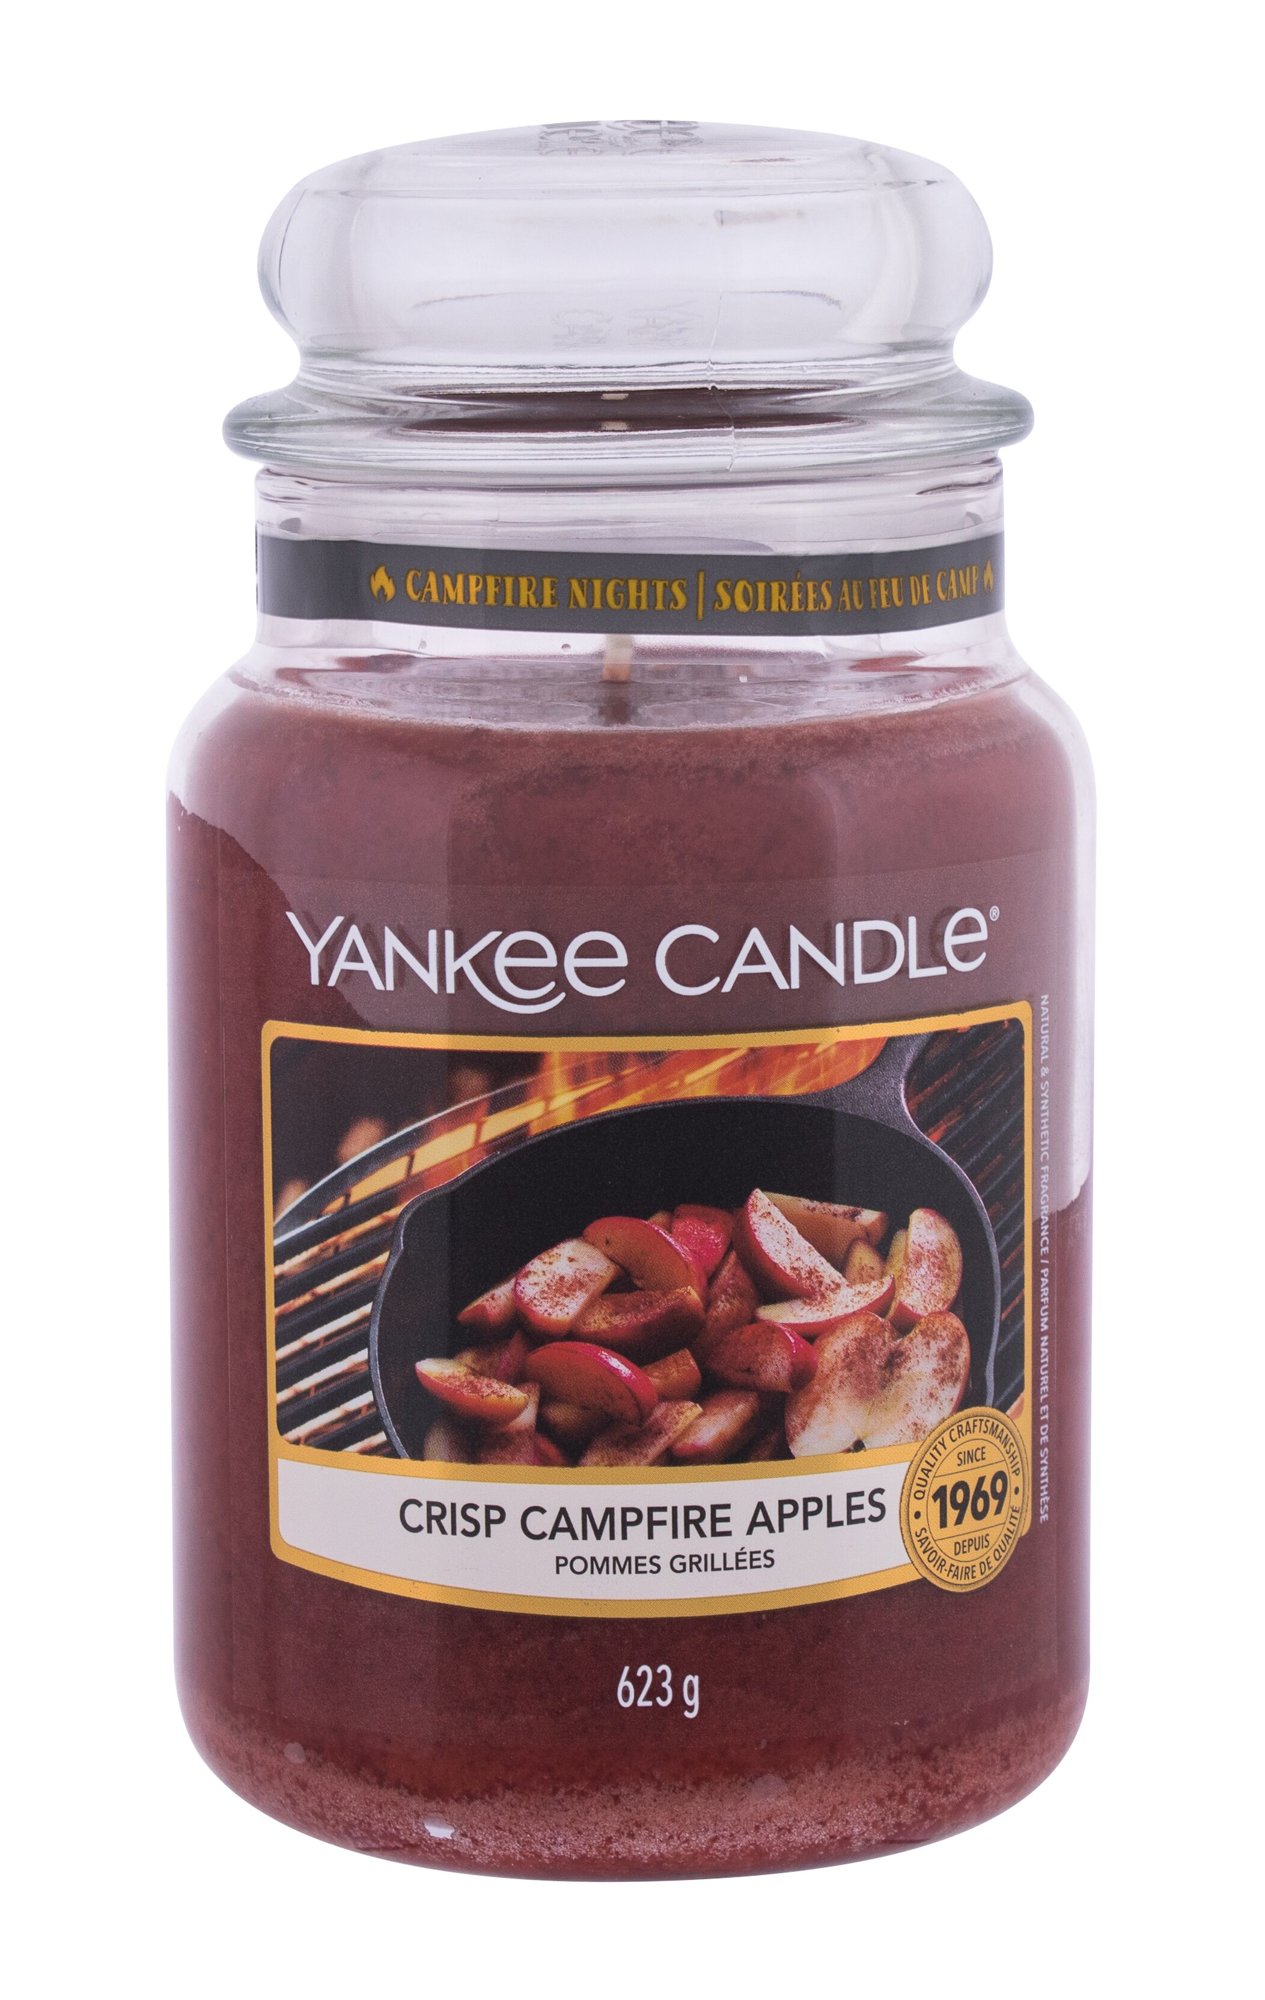 Yankee Candle Crisp Campfire Apples 623g Kvepalai Unisex Scented Candle